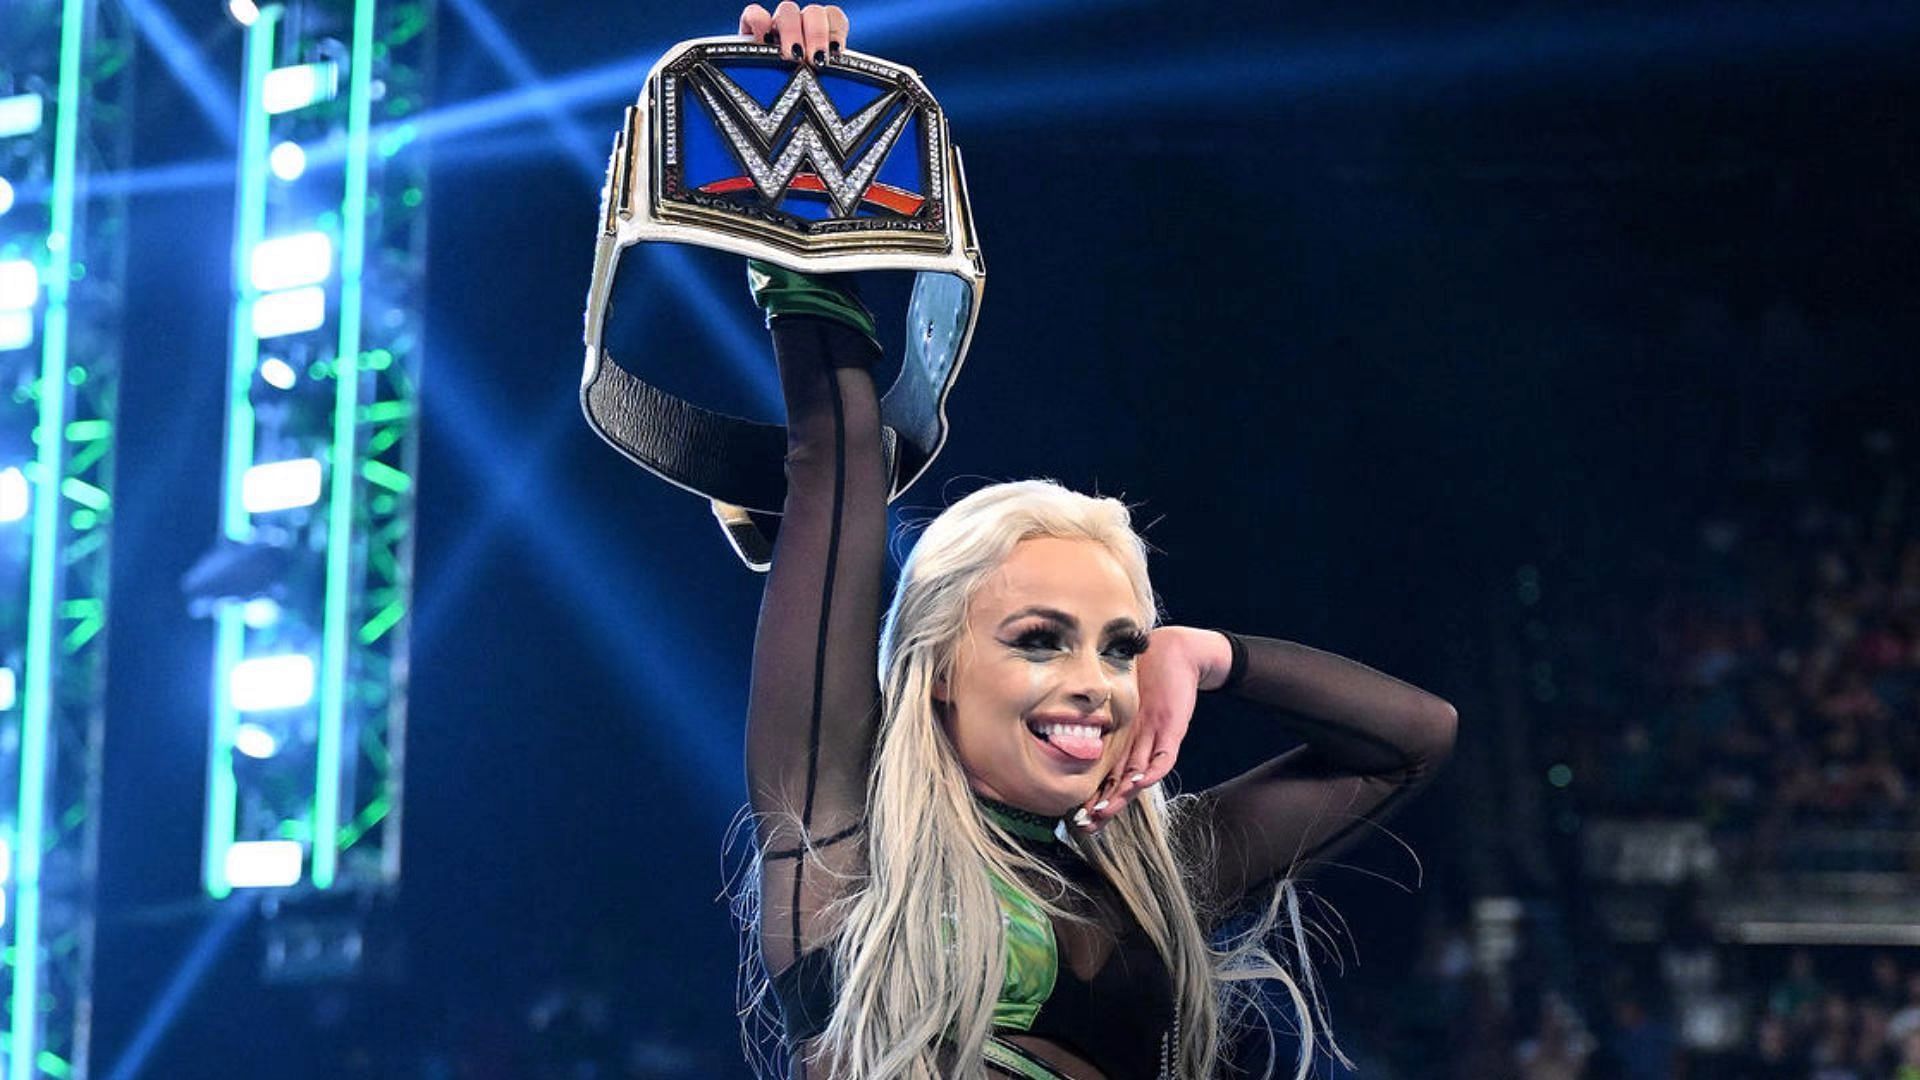 Liv Morgan won the WWE Smackdown Champion at Money in the Bank